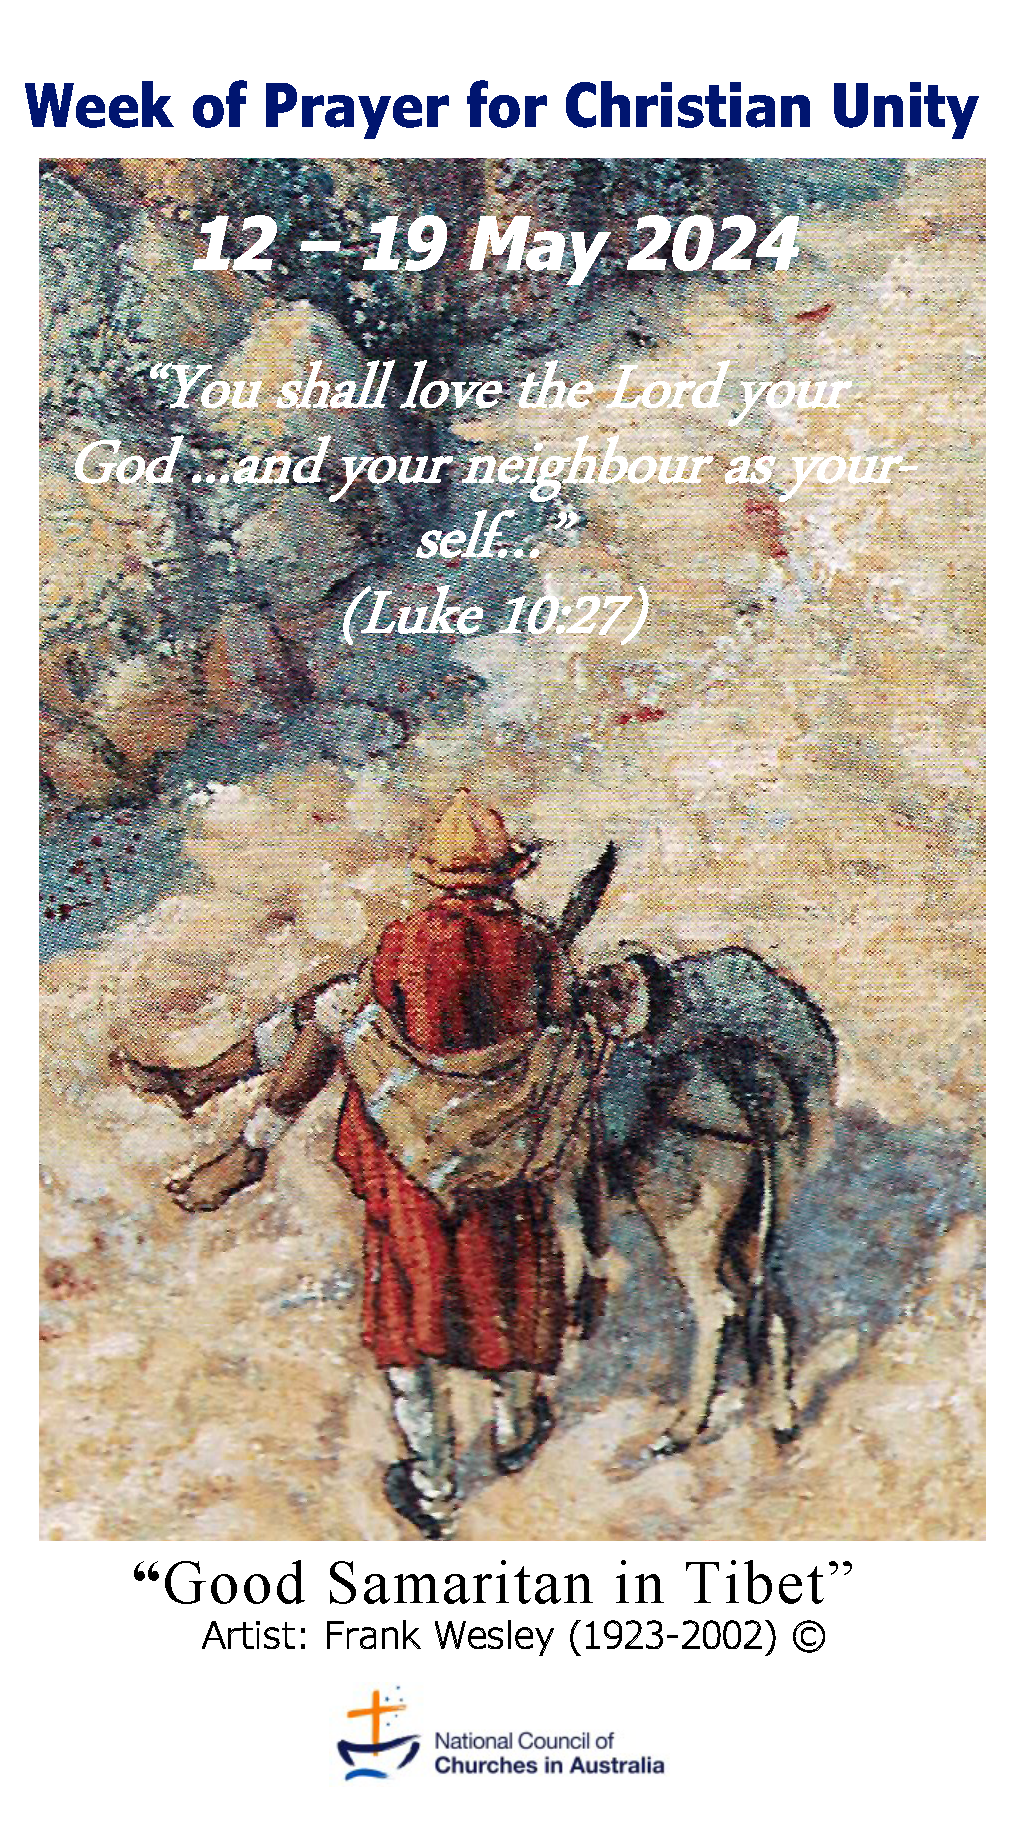 “You shall love the Lord your God ...and your neighbour as yourself…”